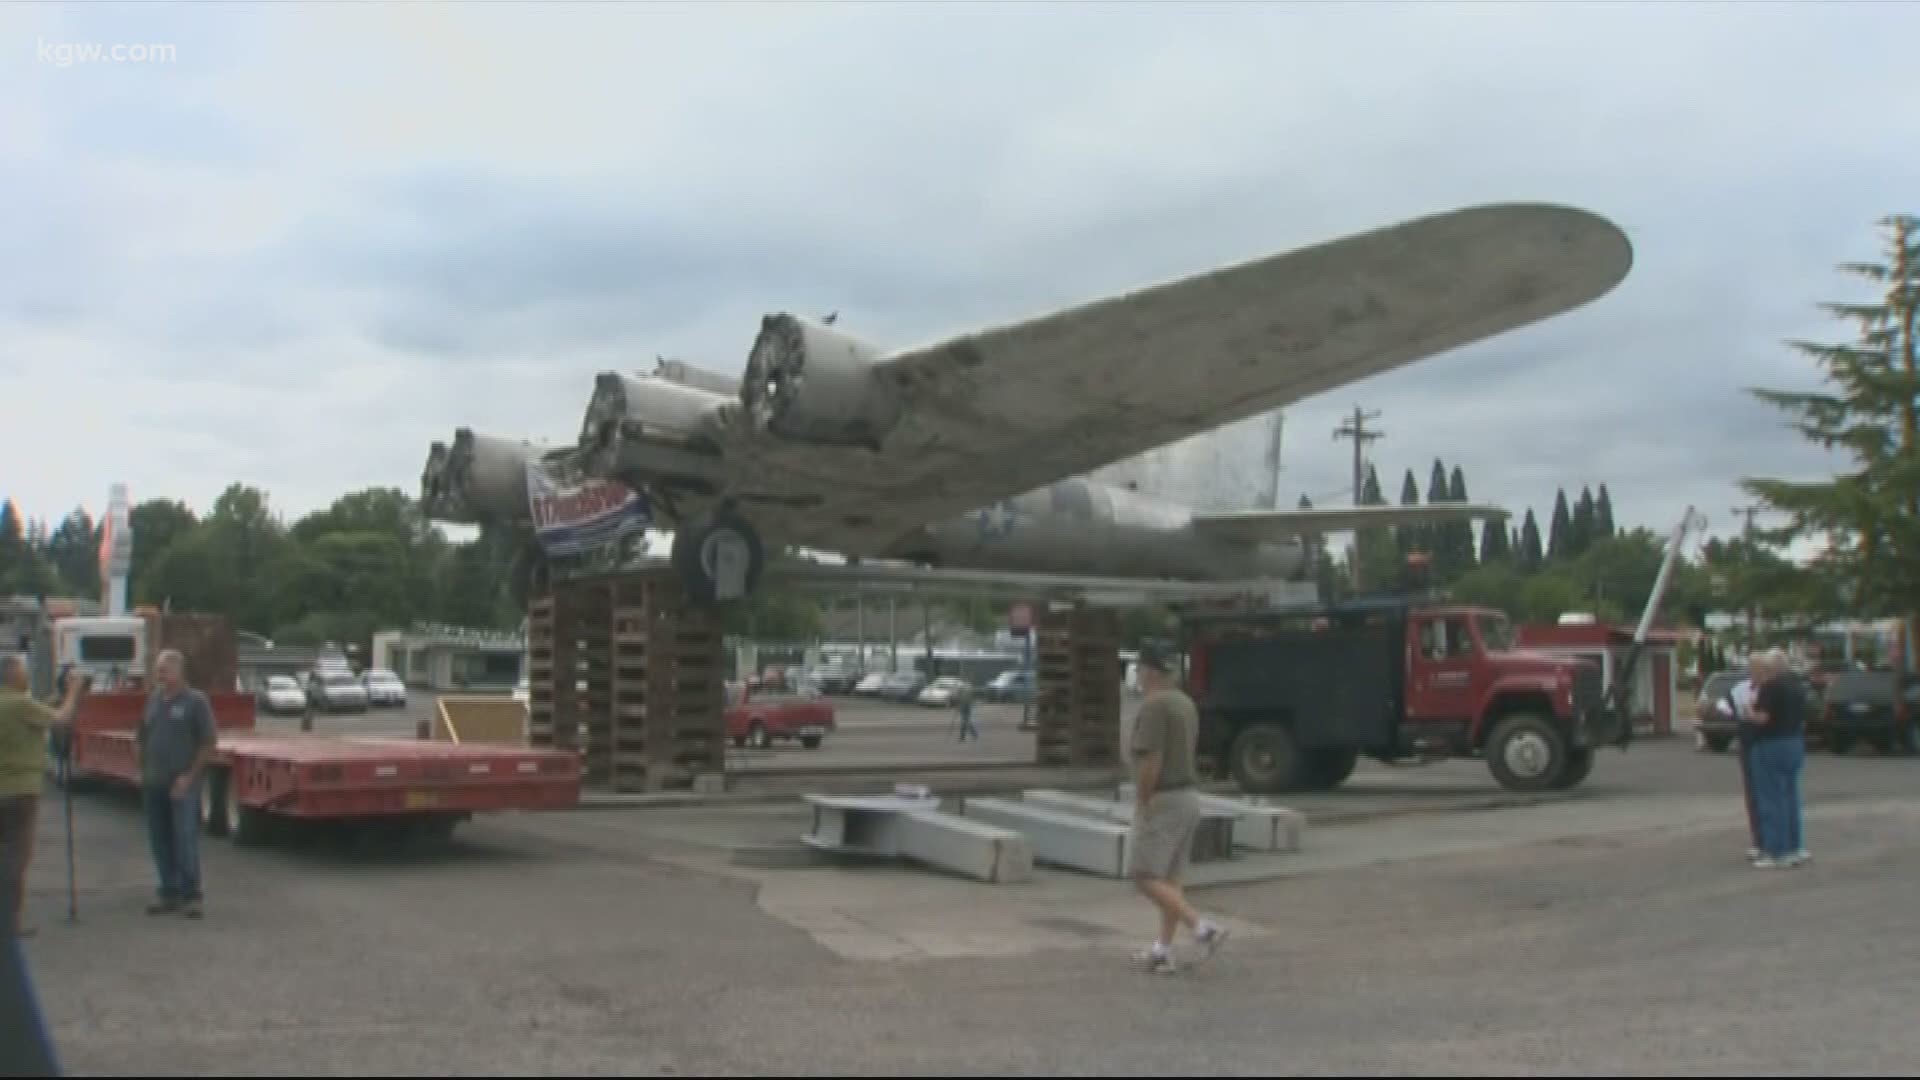 The restaurant just closed but the work to restore the WWII era plane is still going on.